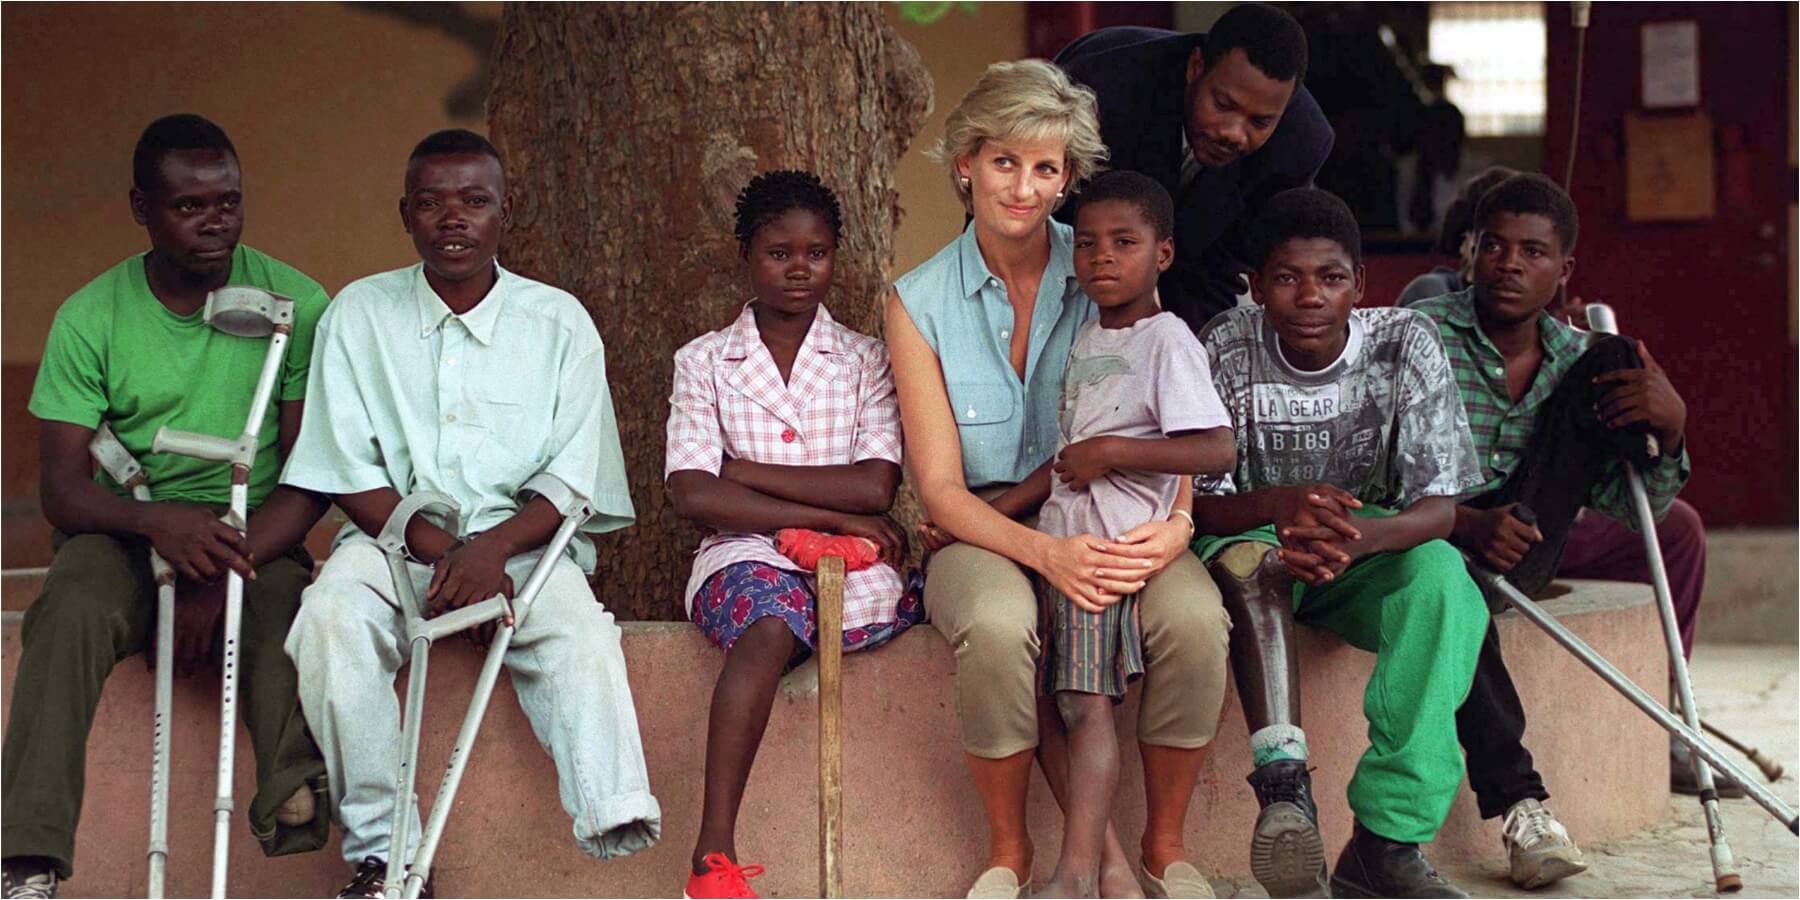 Princess Diana campaigns on behalf of landmines in Angola in 1997.